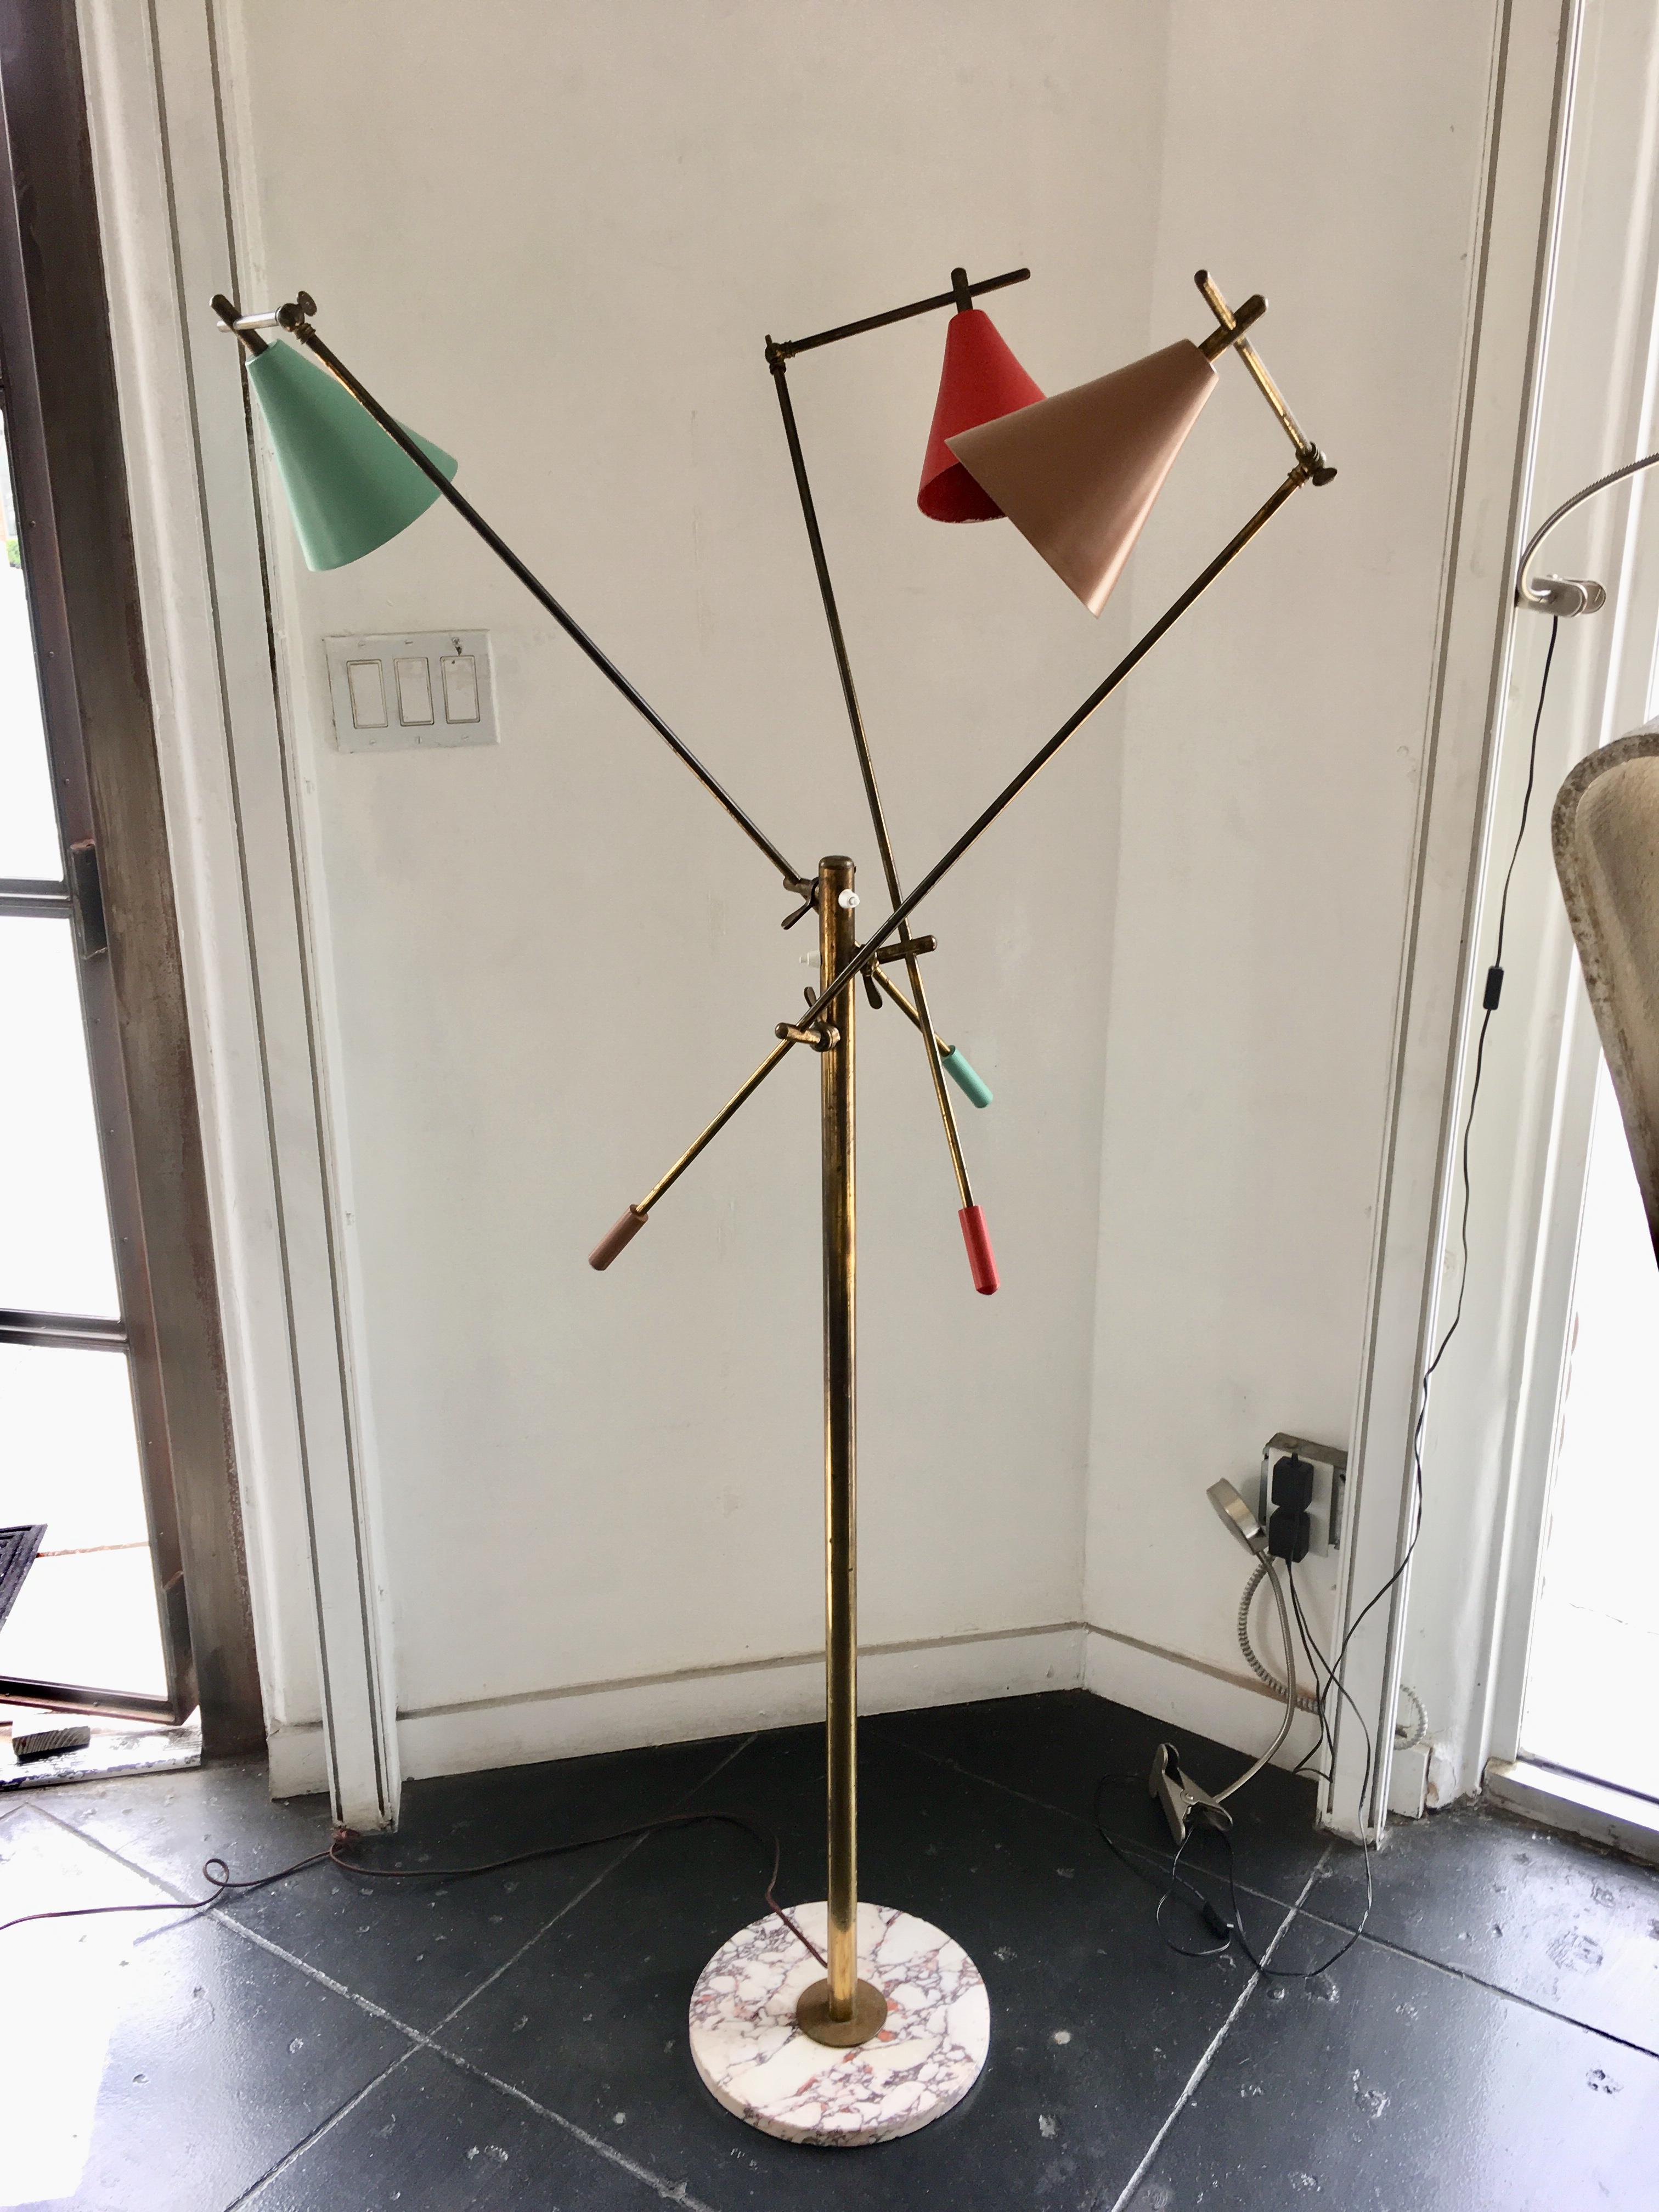 Very rare three-arm floor lamp by Stilnovo. Manufactured in Italy, circa 1950s. Brass hardware, original enameled aluminum shades, marble base. Arms and shades adjust to various positions. Rewired for US sockets. Takes three E27 40w maximum bulbs.